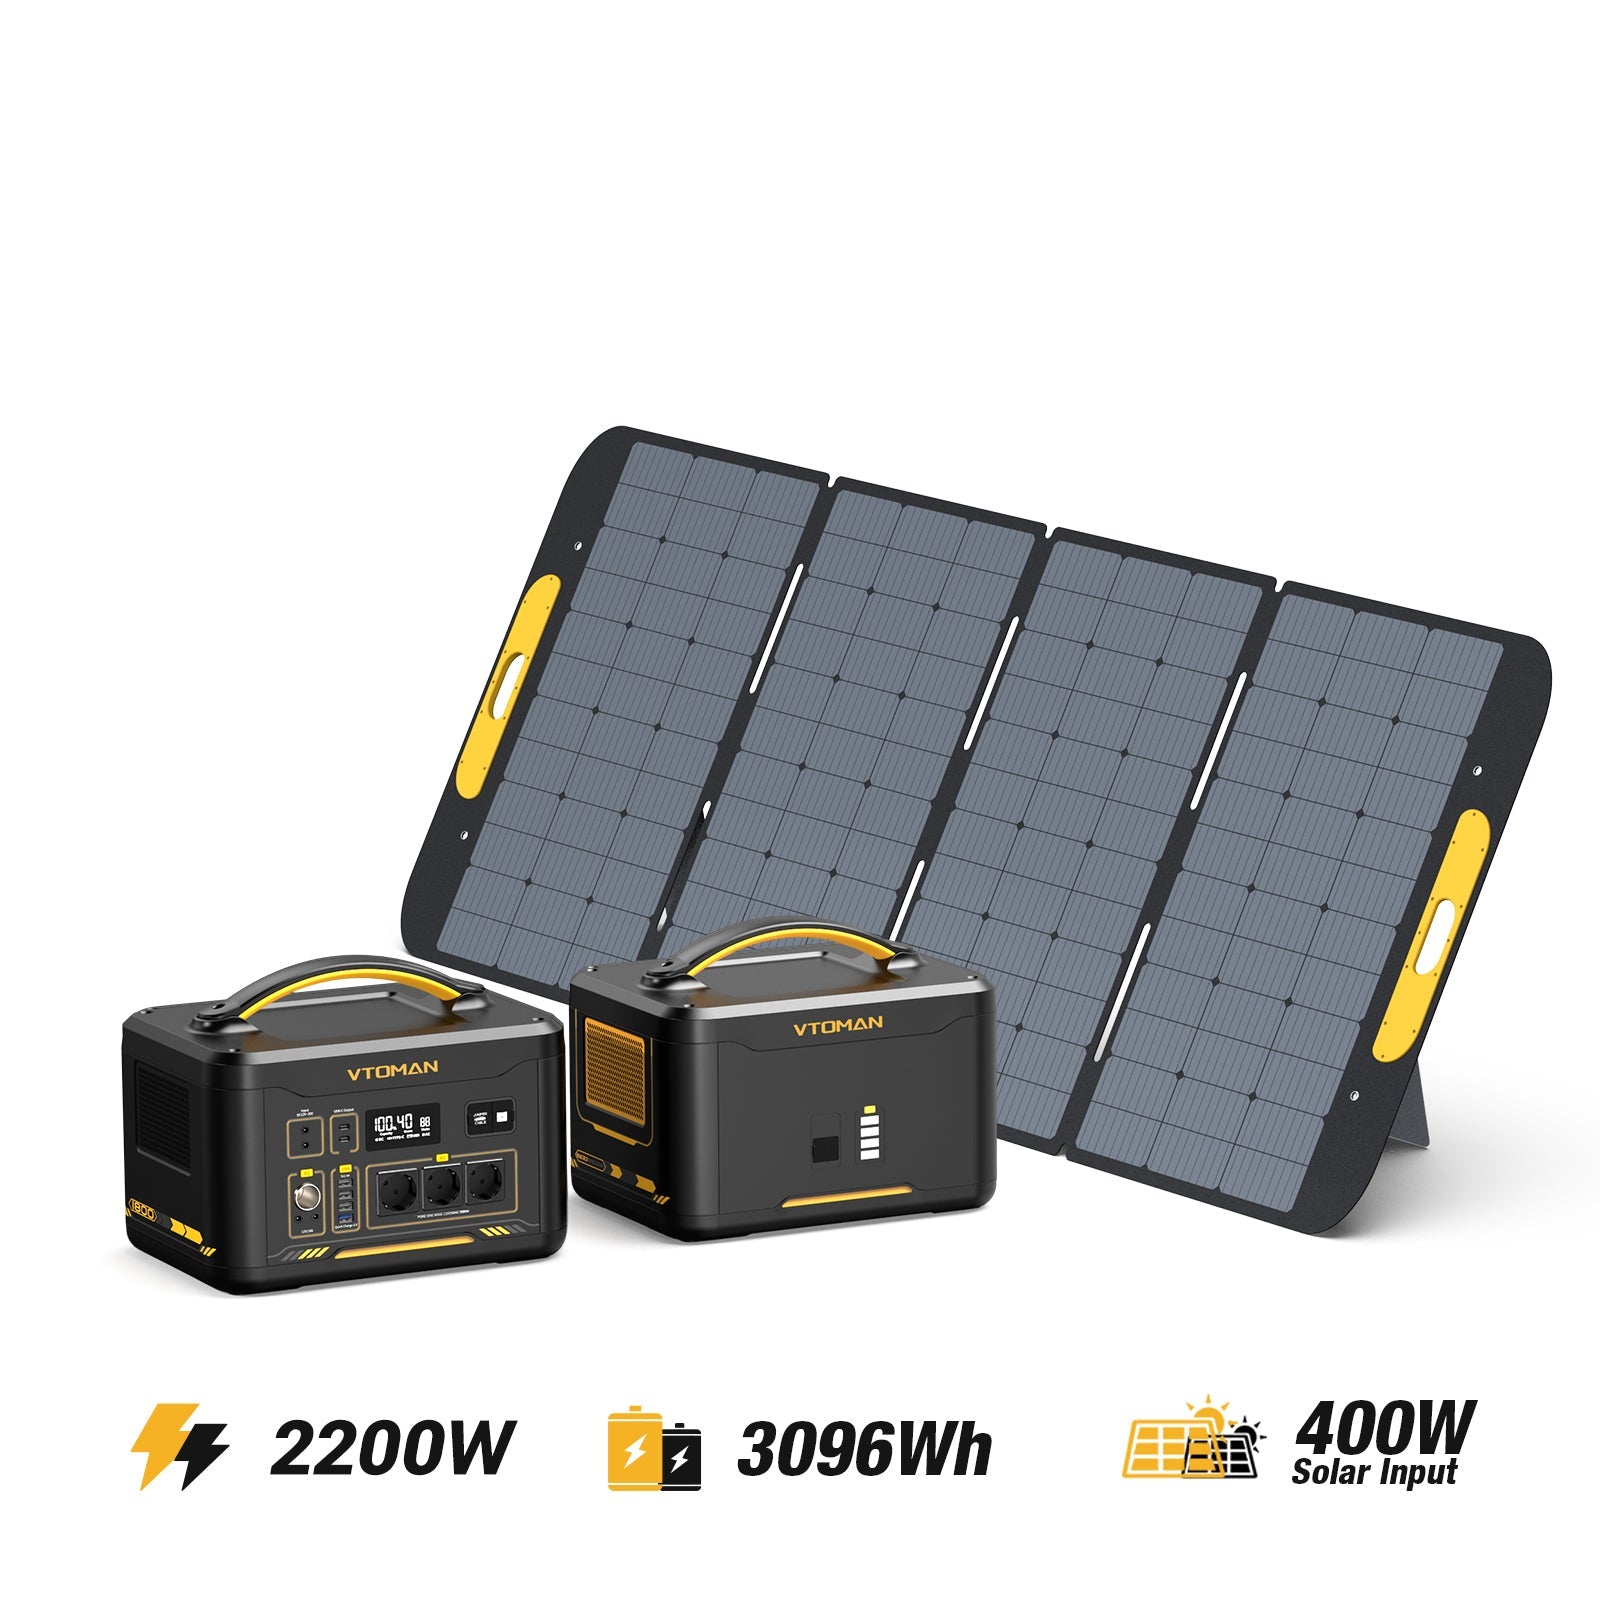 Jump 2200W/3096Wh 400W Solargenerator mit 22000Pa Auto-Staubsauger